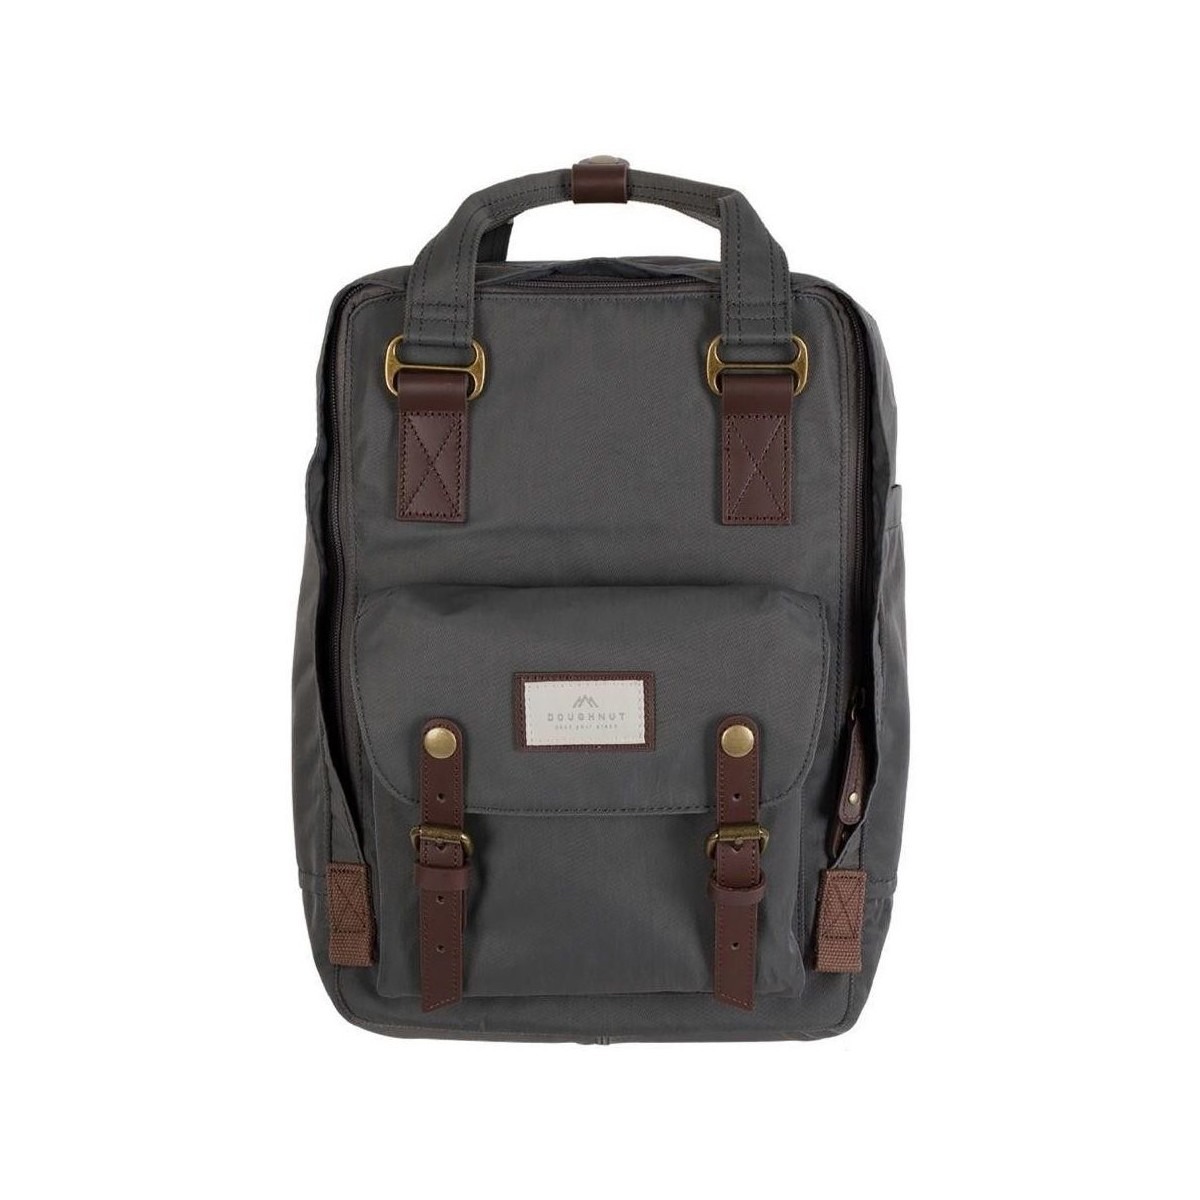 Men Backpack in Grey by Spartoo GOOFASH